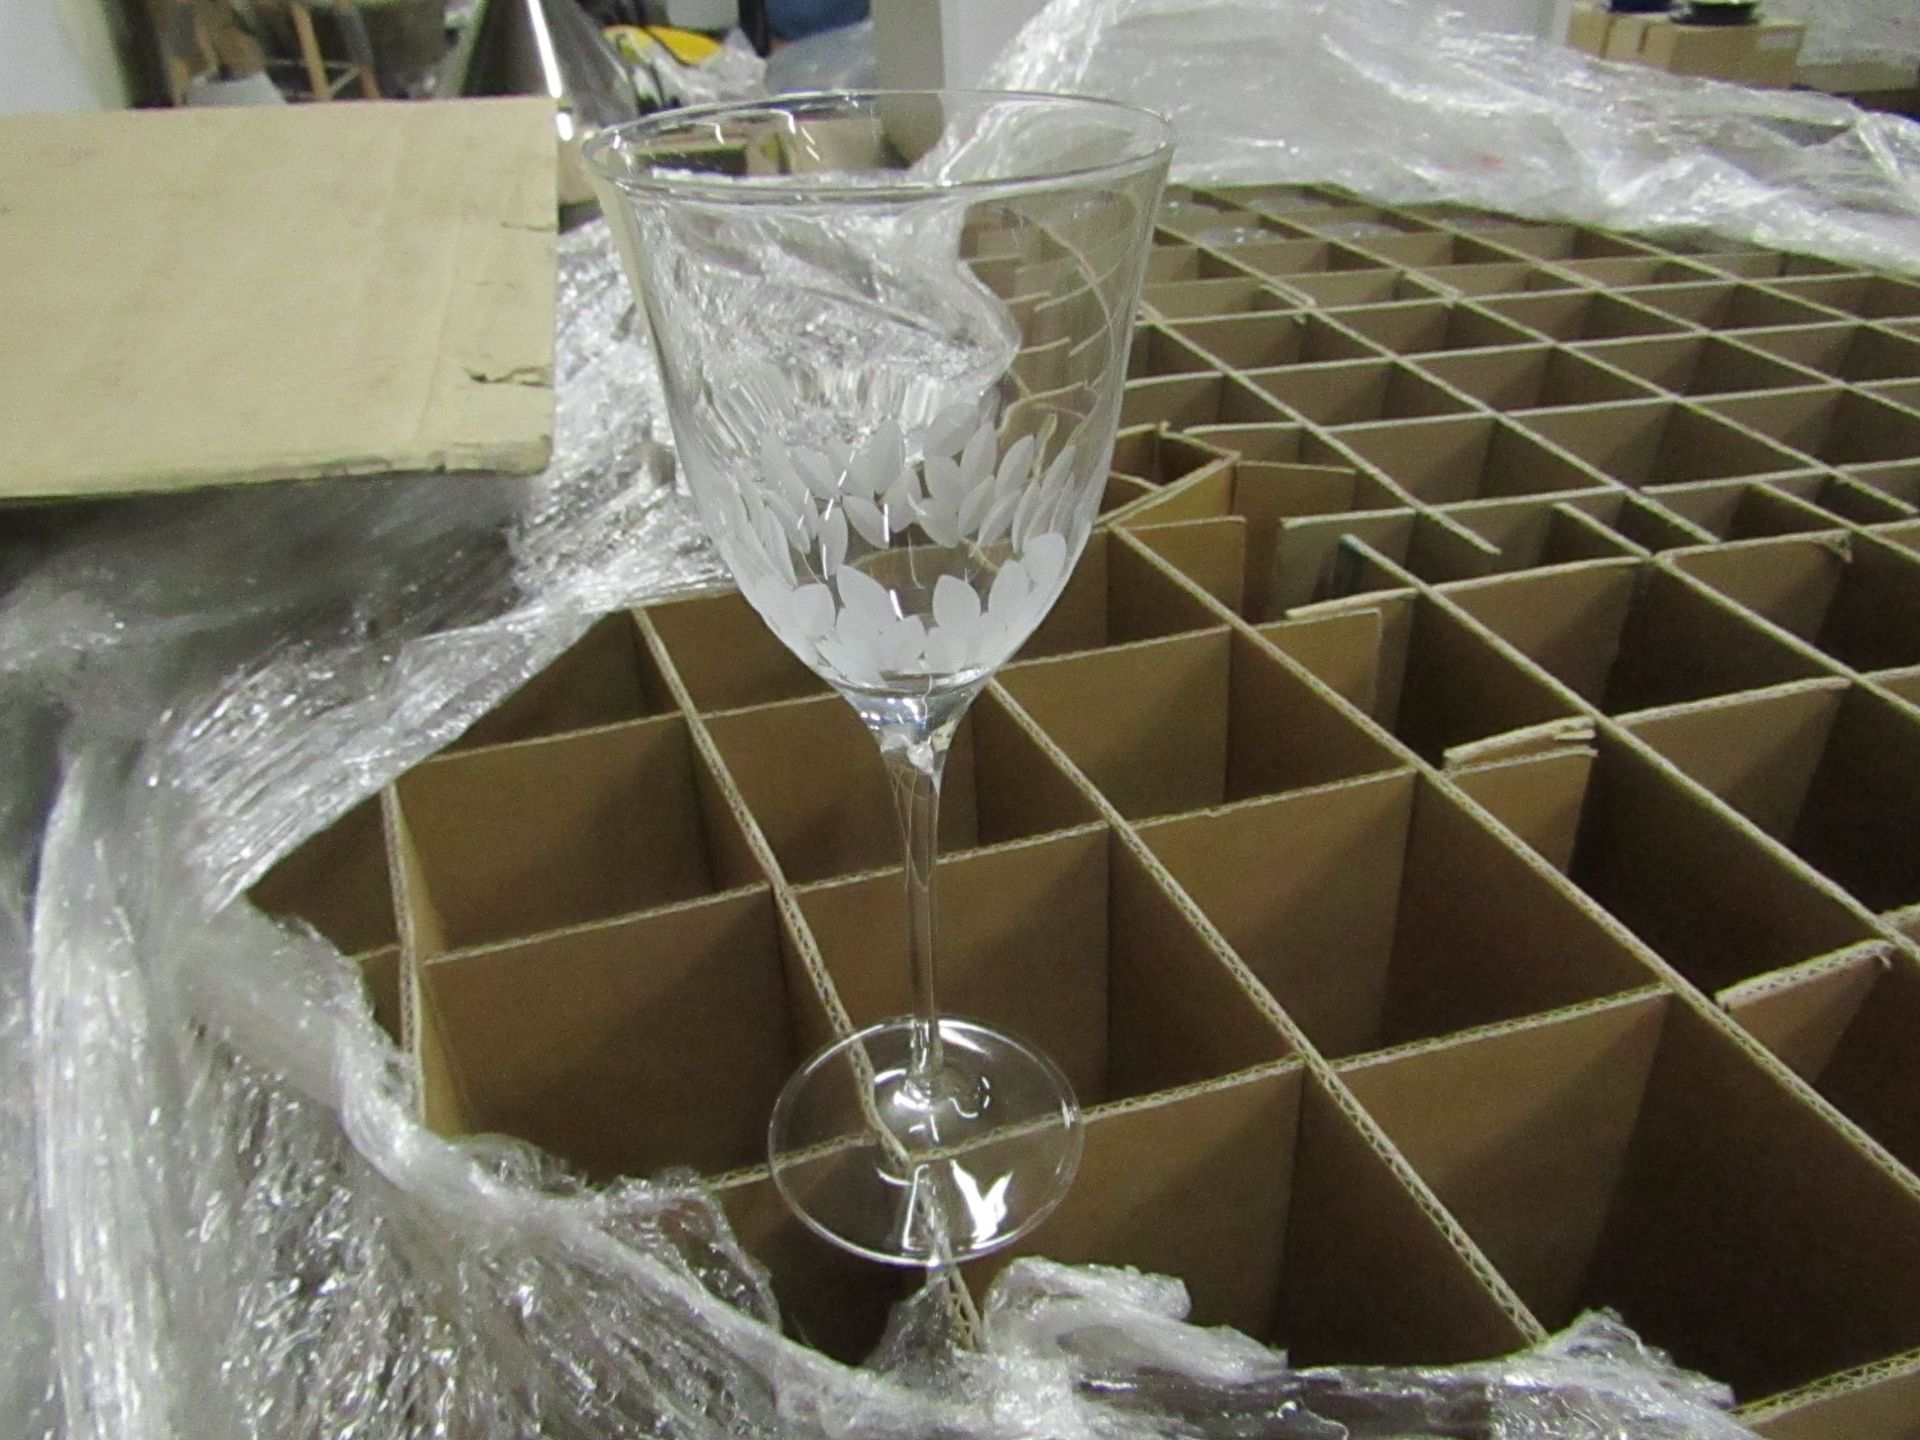 6x Wine Glasses. New - See Image For Design.